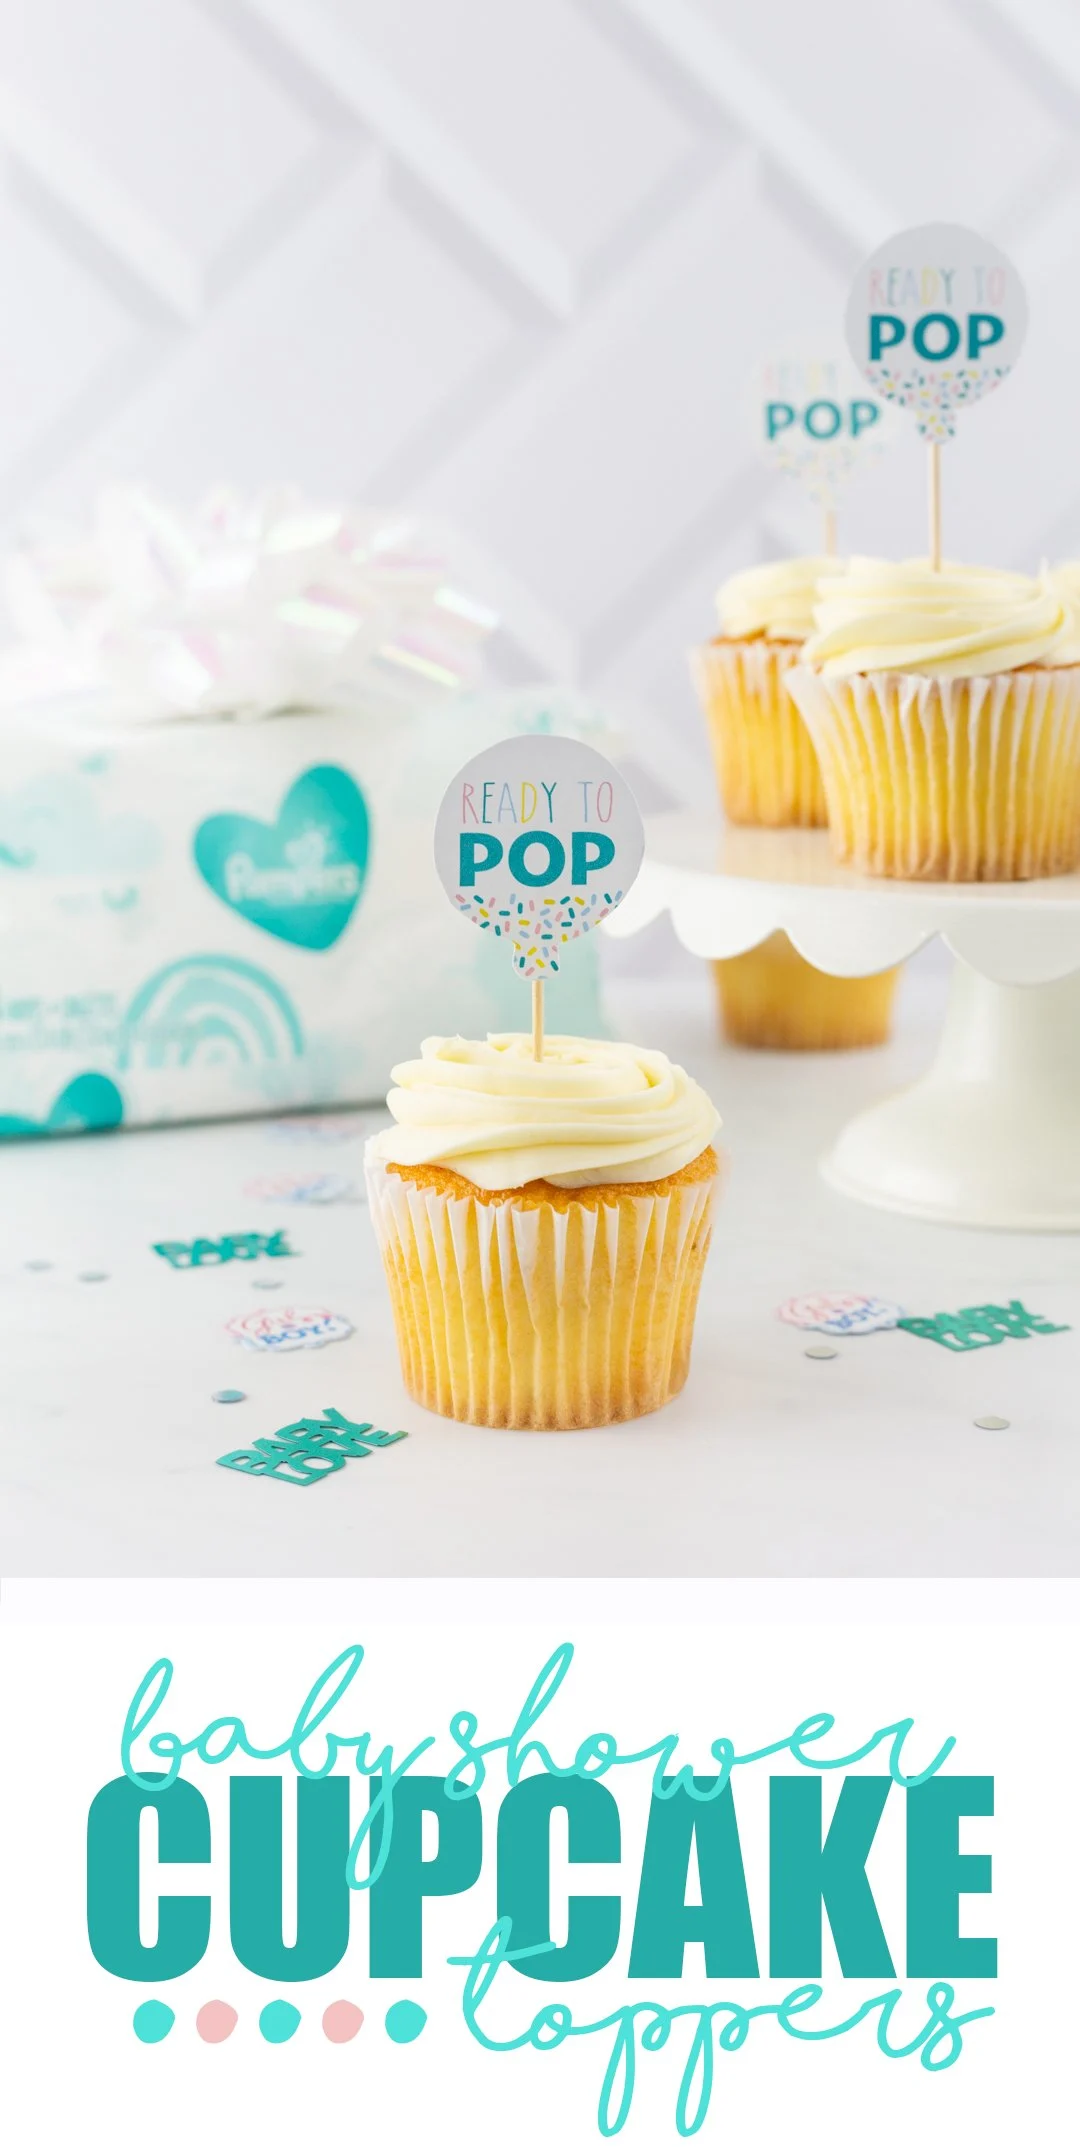 ❇️Download my free “Ready To Pop” cupcake toppers to take your next baby shower to the next level of cuteness by clicking the image and check out the Pampers deal happening all month at Sam's Club! #ad #AllMonthForMom